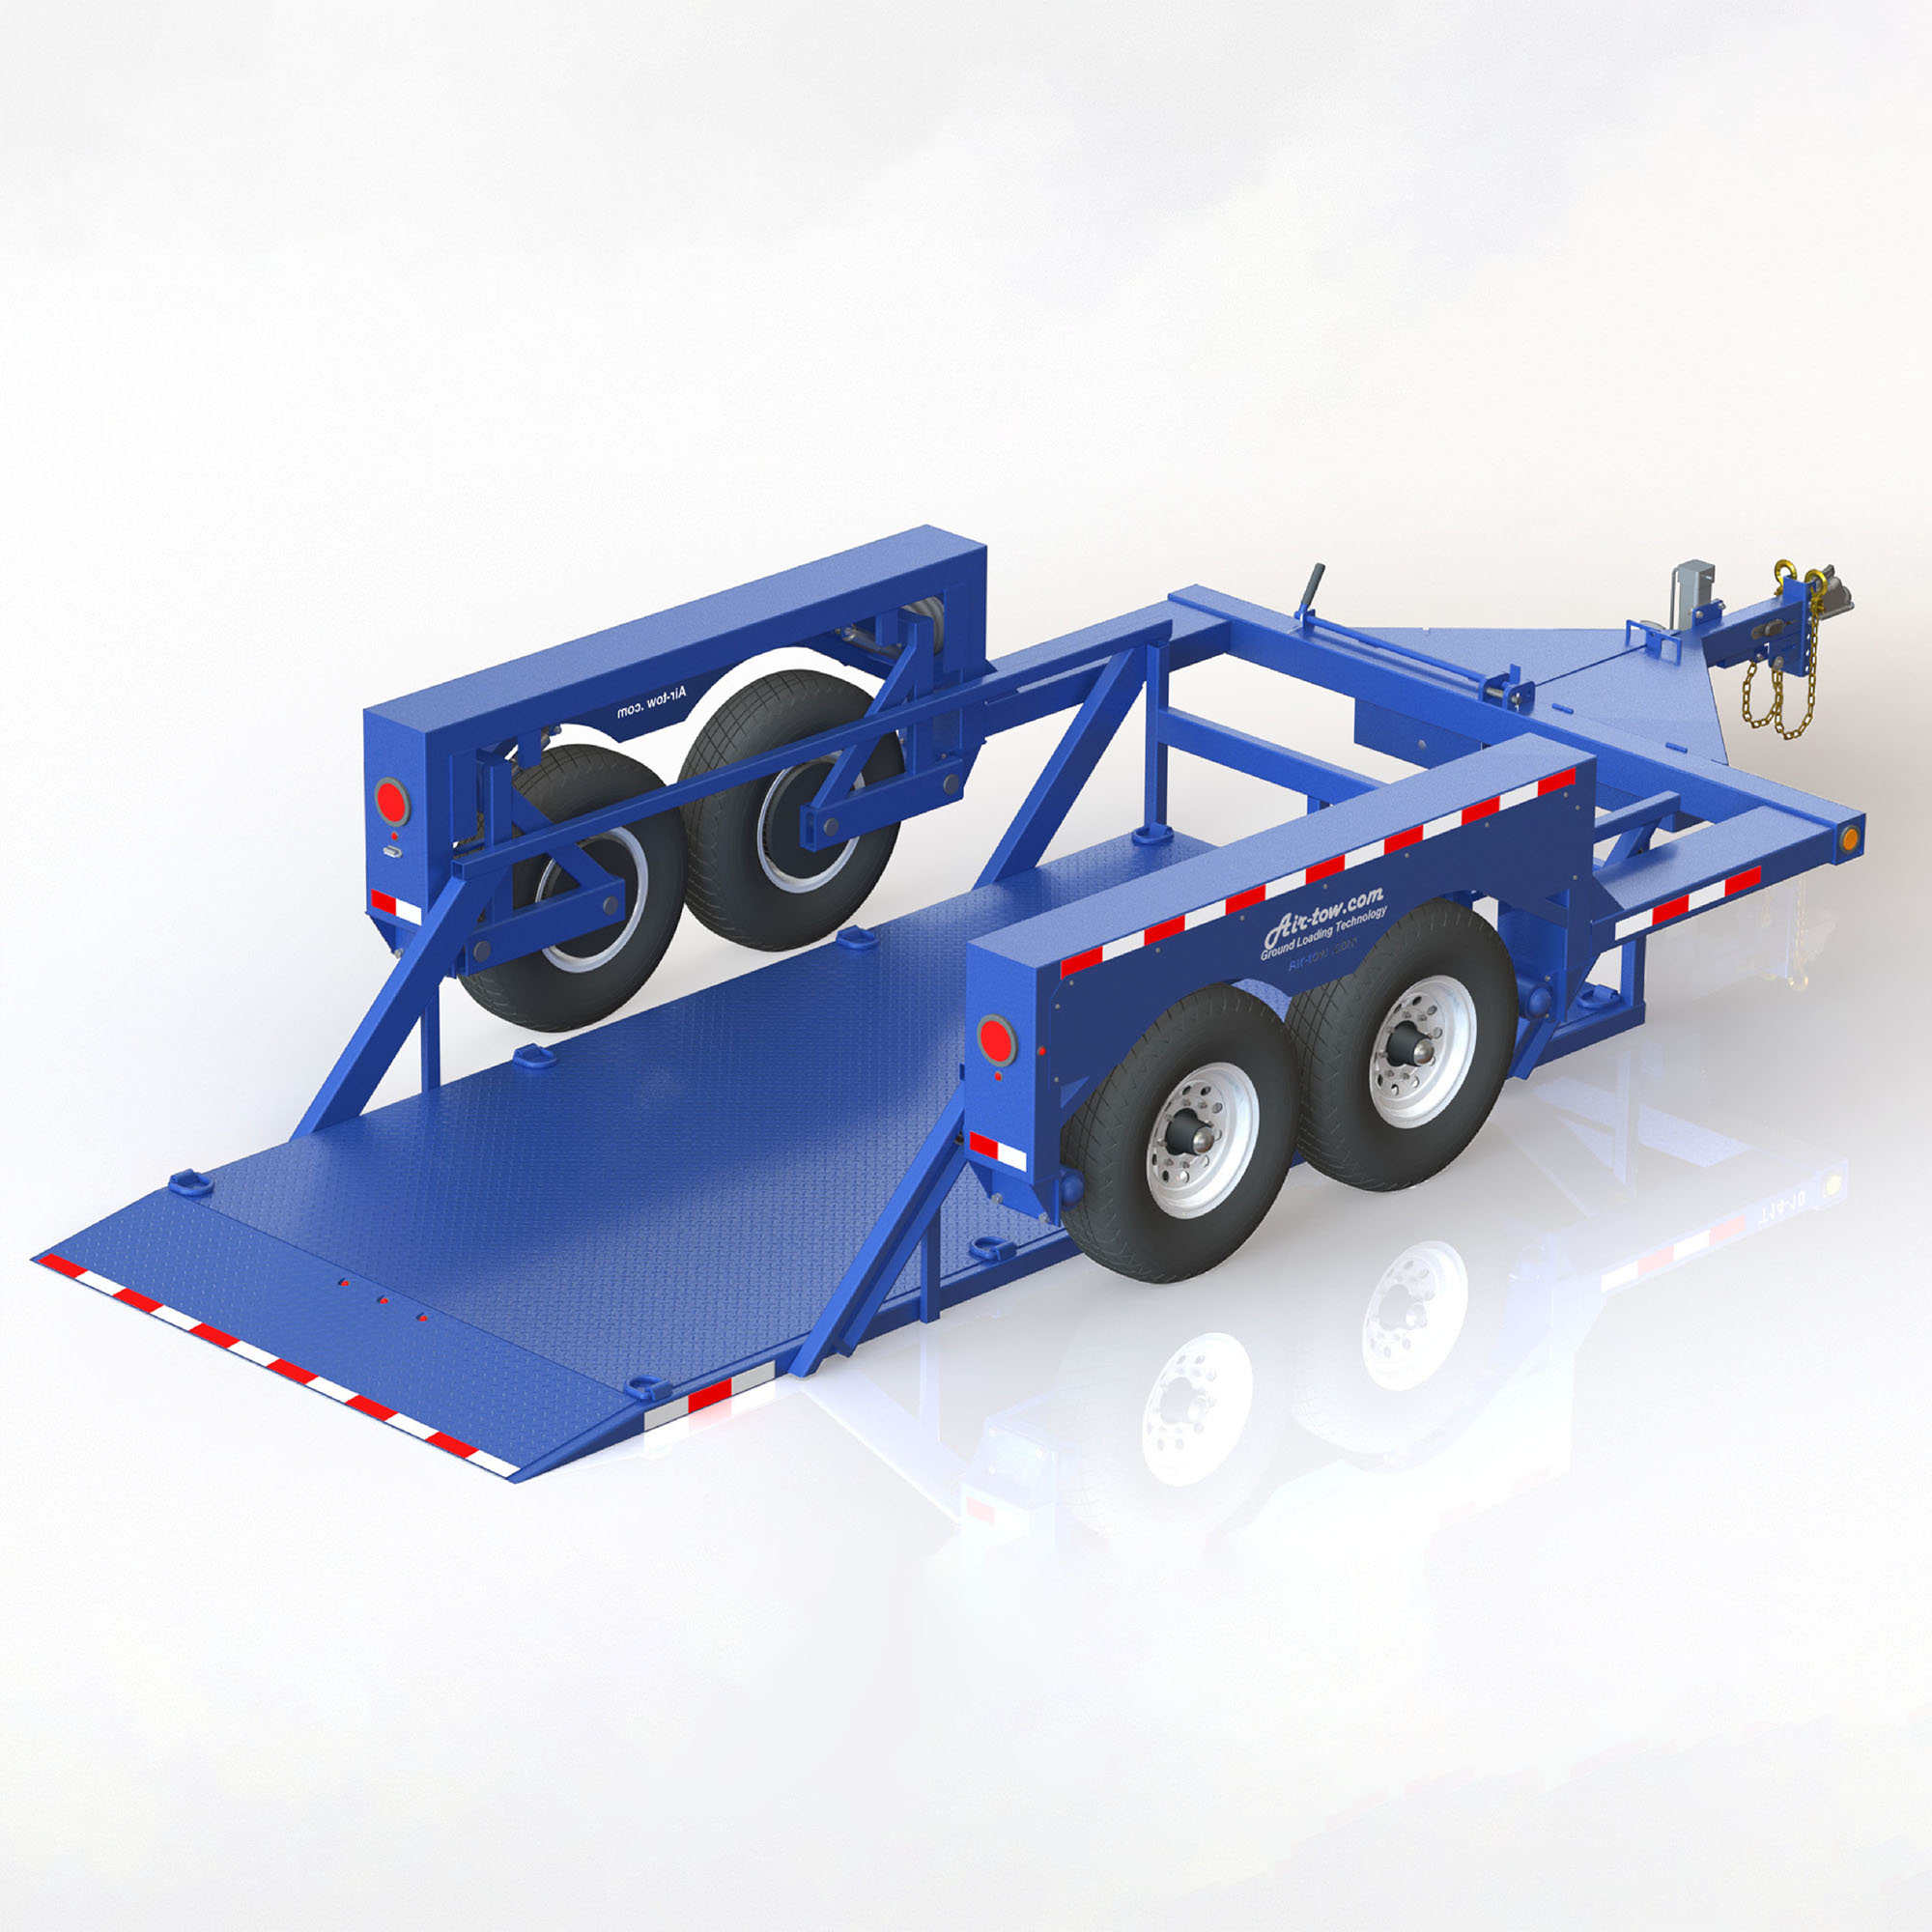 Air-Tow T14-12 Tandem Axle Flatbed Trailer